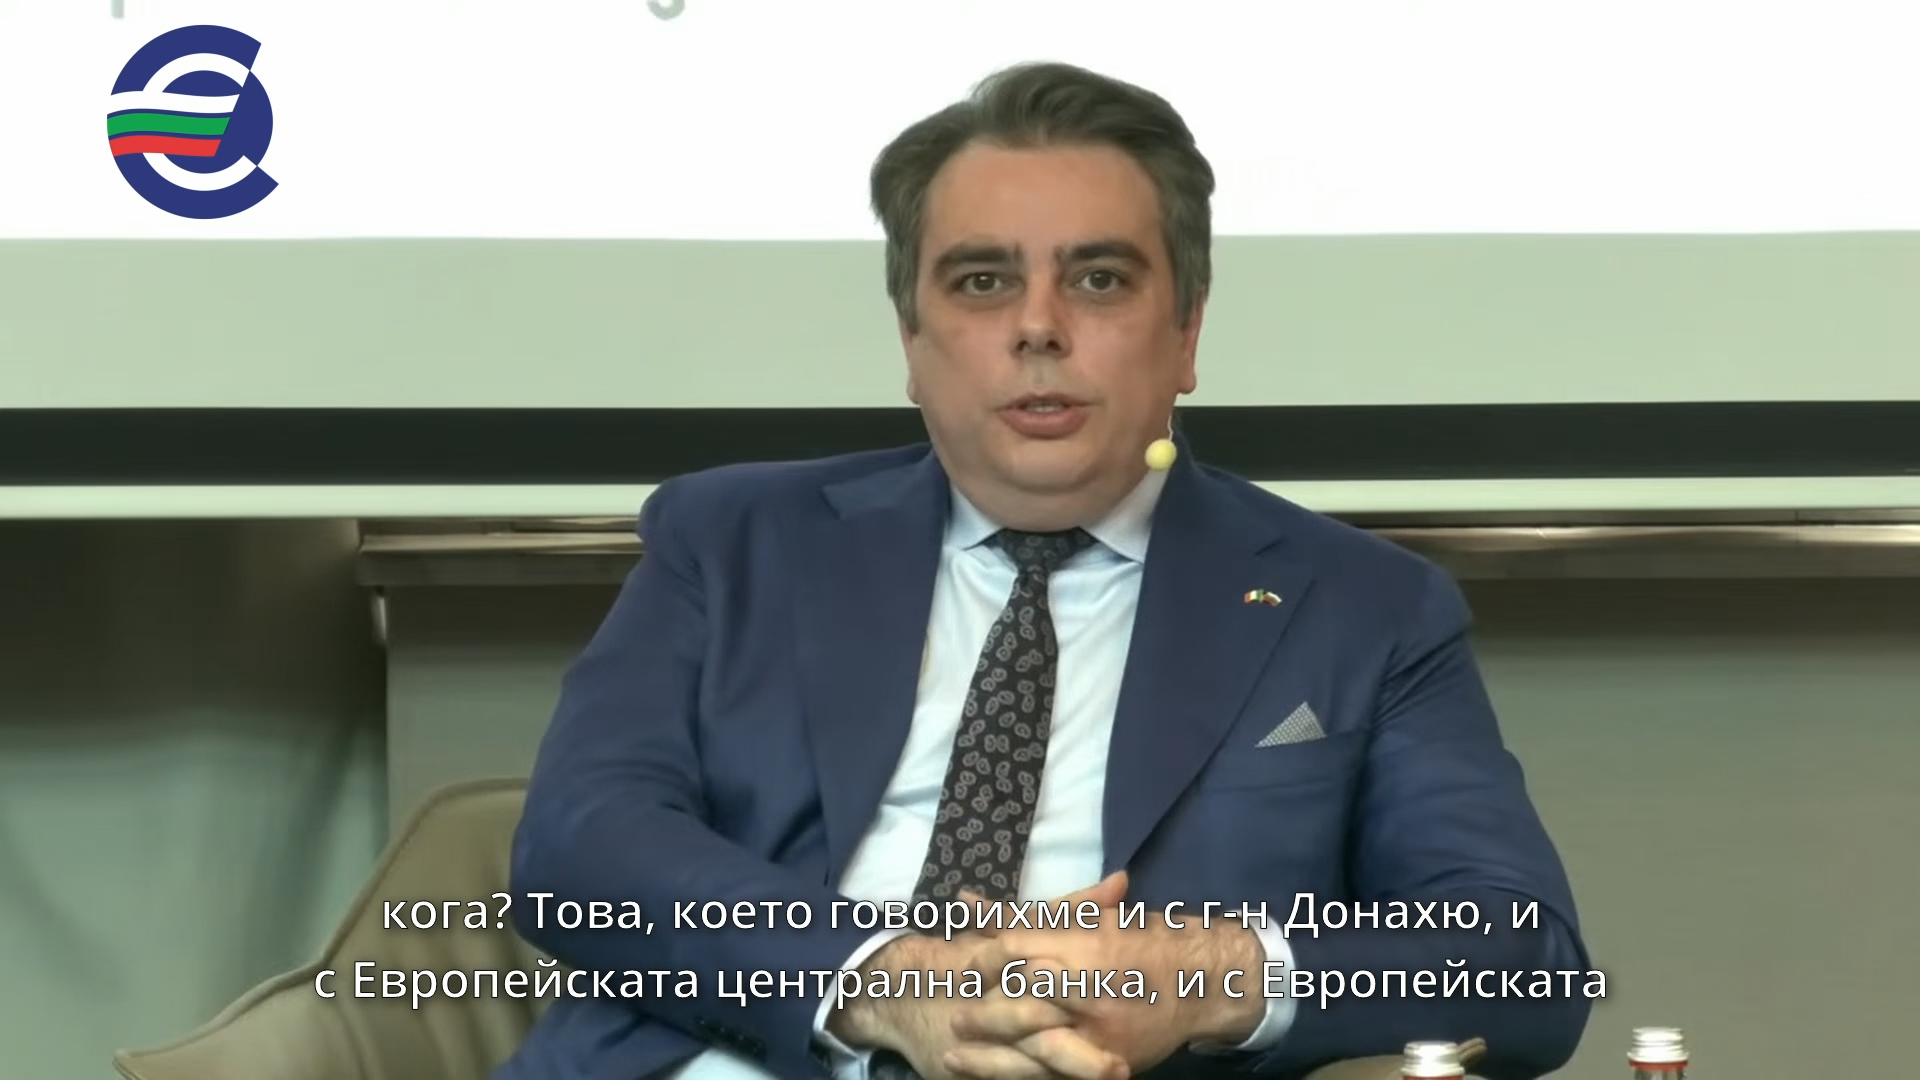 The Minister of Finance Assen Vassilev at the conference "Bulgaria's European path - joining the euro area: advantages and challenges for business"